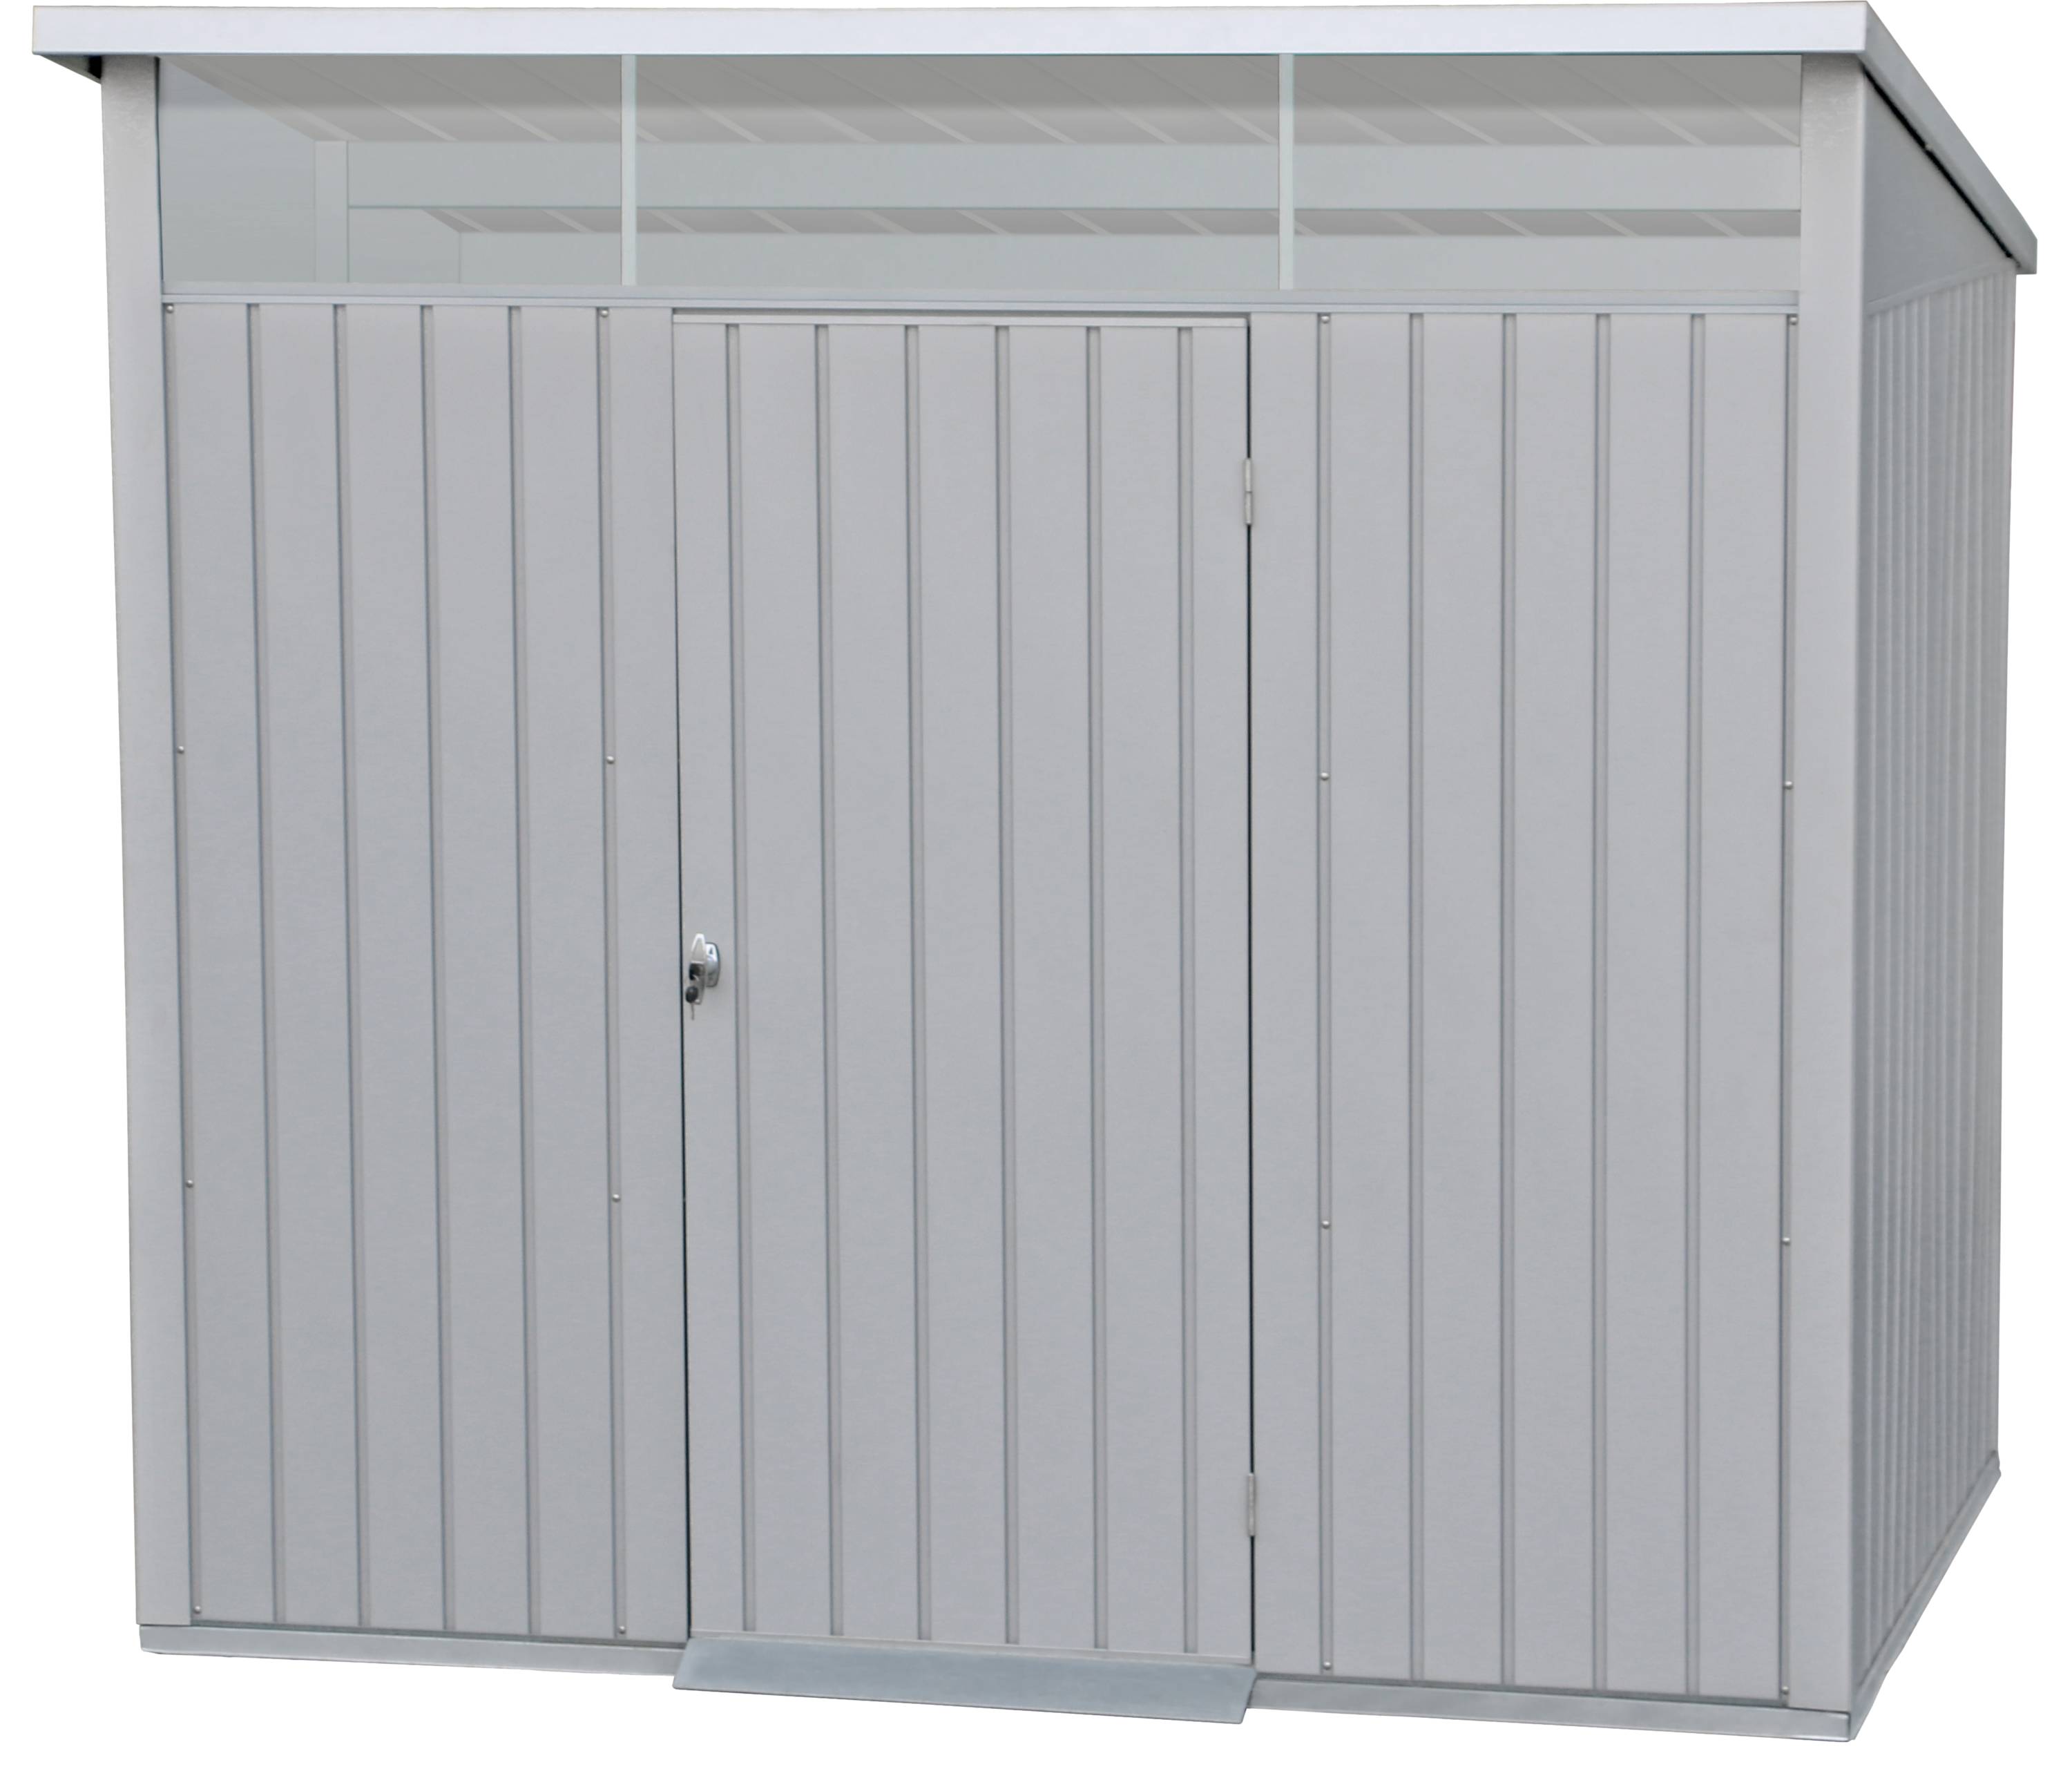 VENTED SIDES SUPPORT & ELEVATE AND AIR FLOW GARDEN SHED BASE KIT LIKE NO OTHER